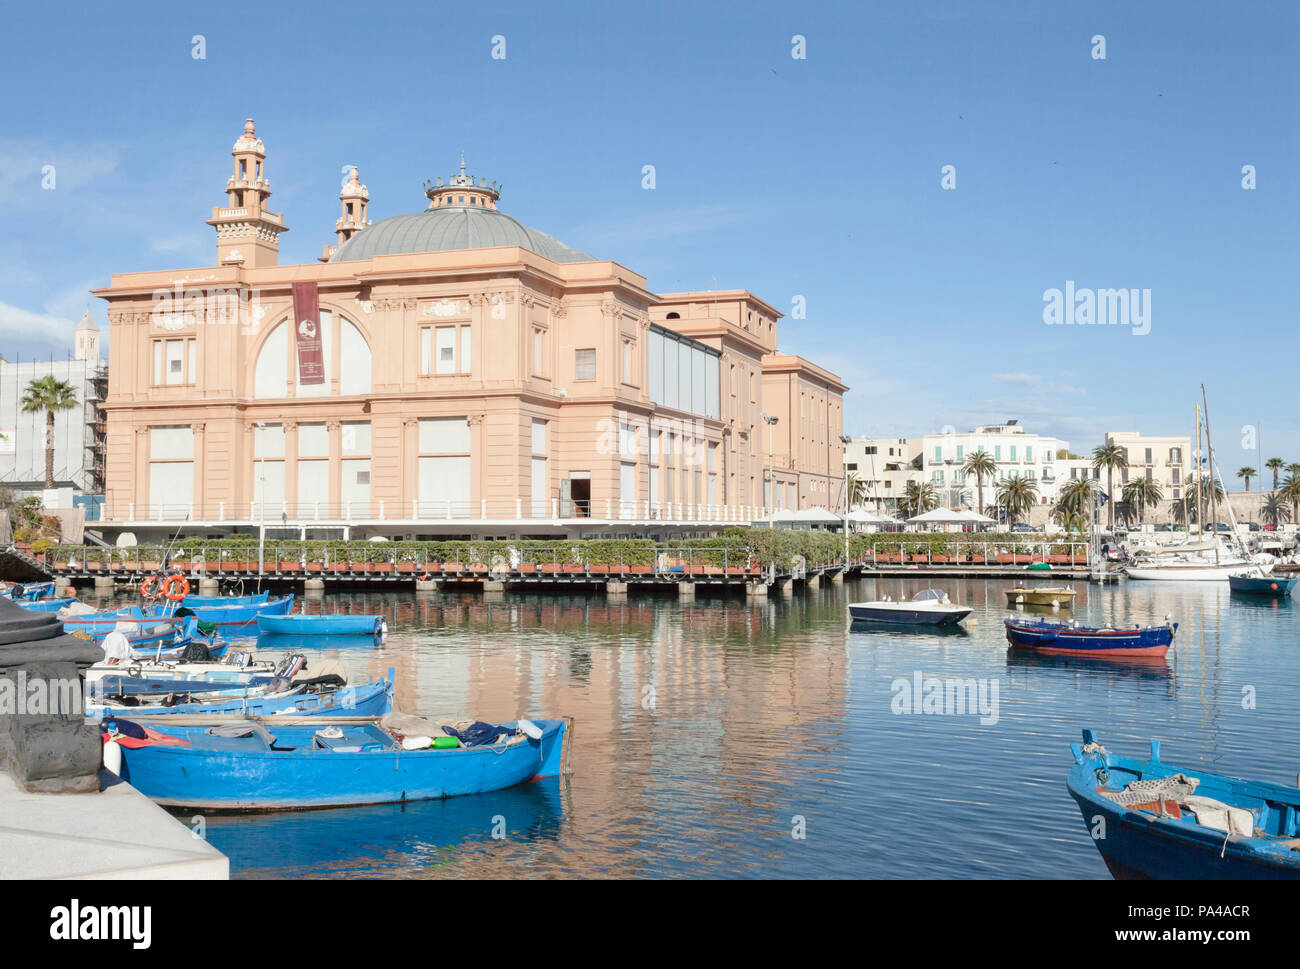 BARI, ITALY - November 8, 2017 - The Margherita Theatre is a historical theatre of the city of Bari, built on the sea. Right side shot. Stock Photo